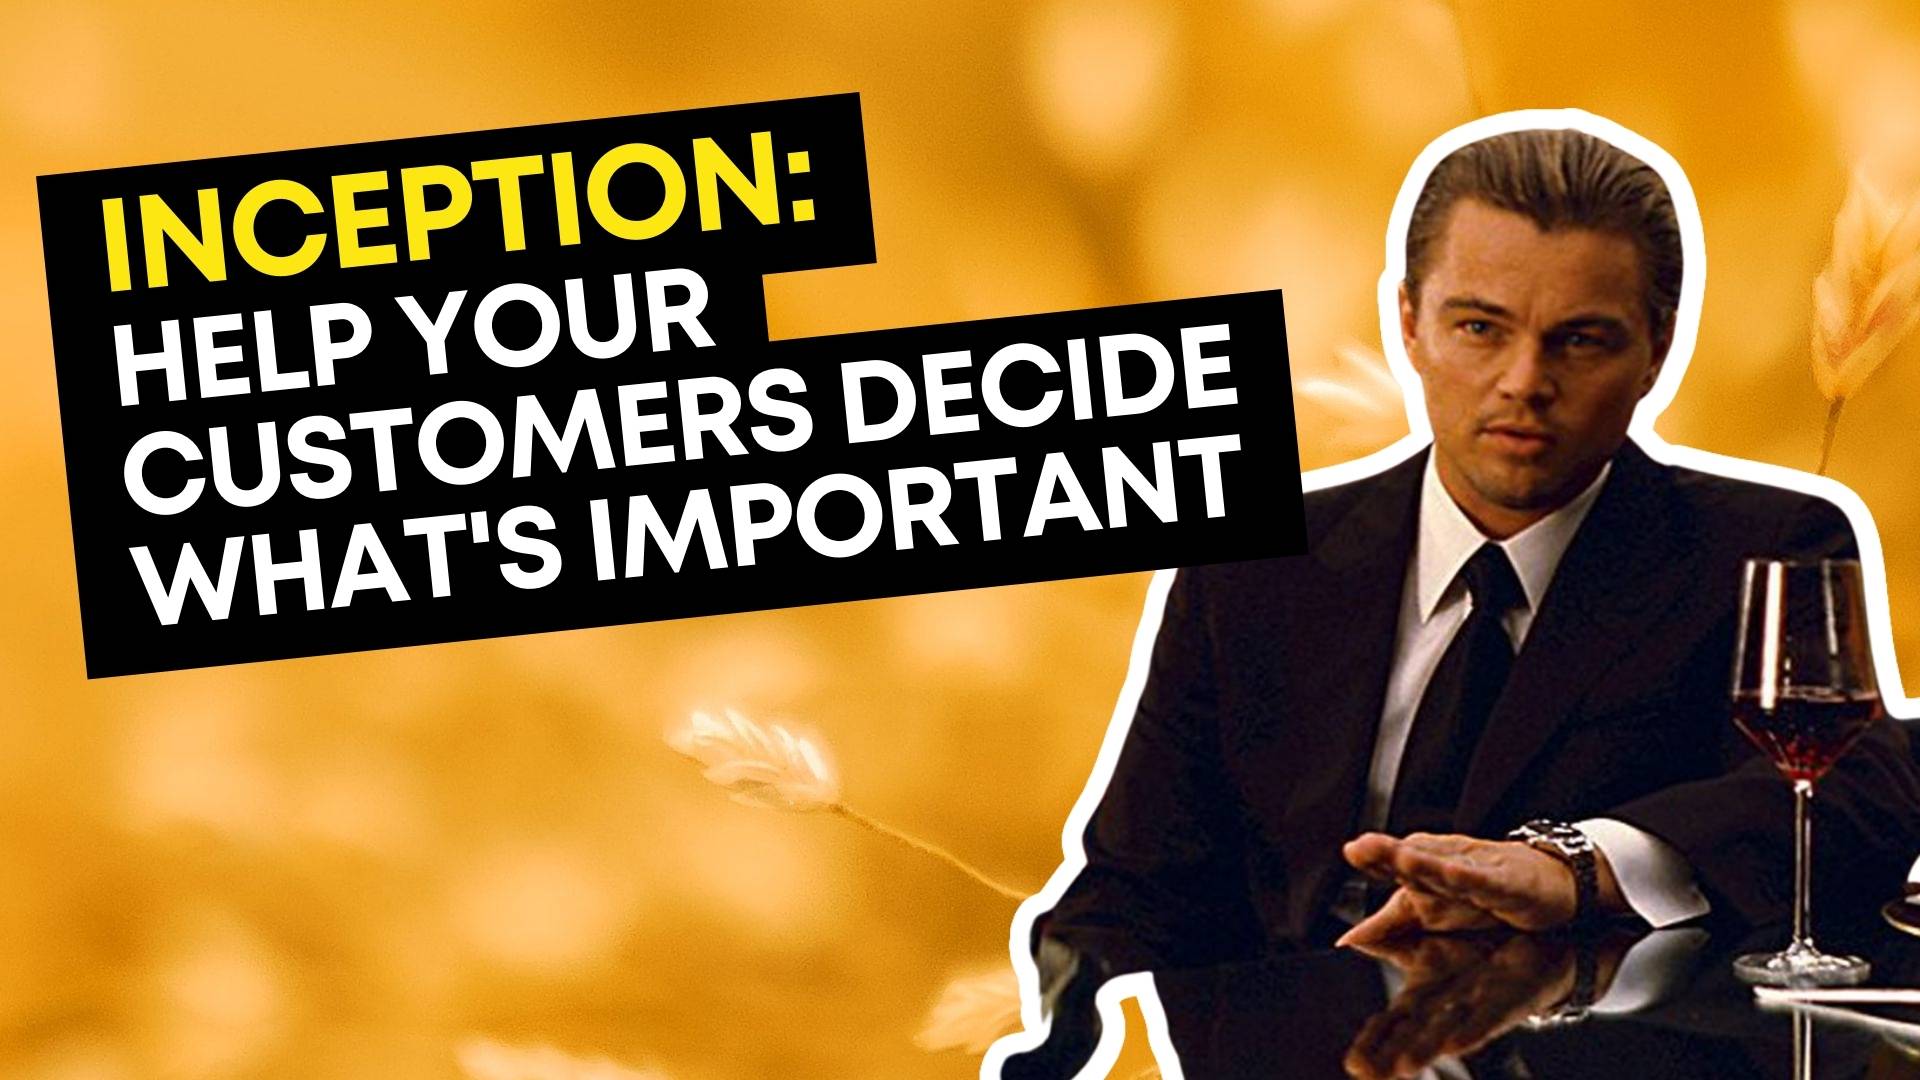 Help Your Customers Decide What’s Important